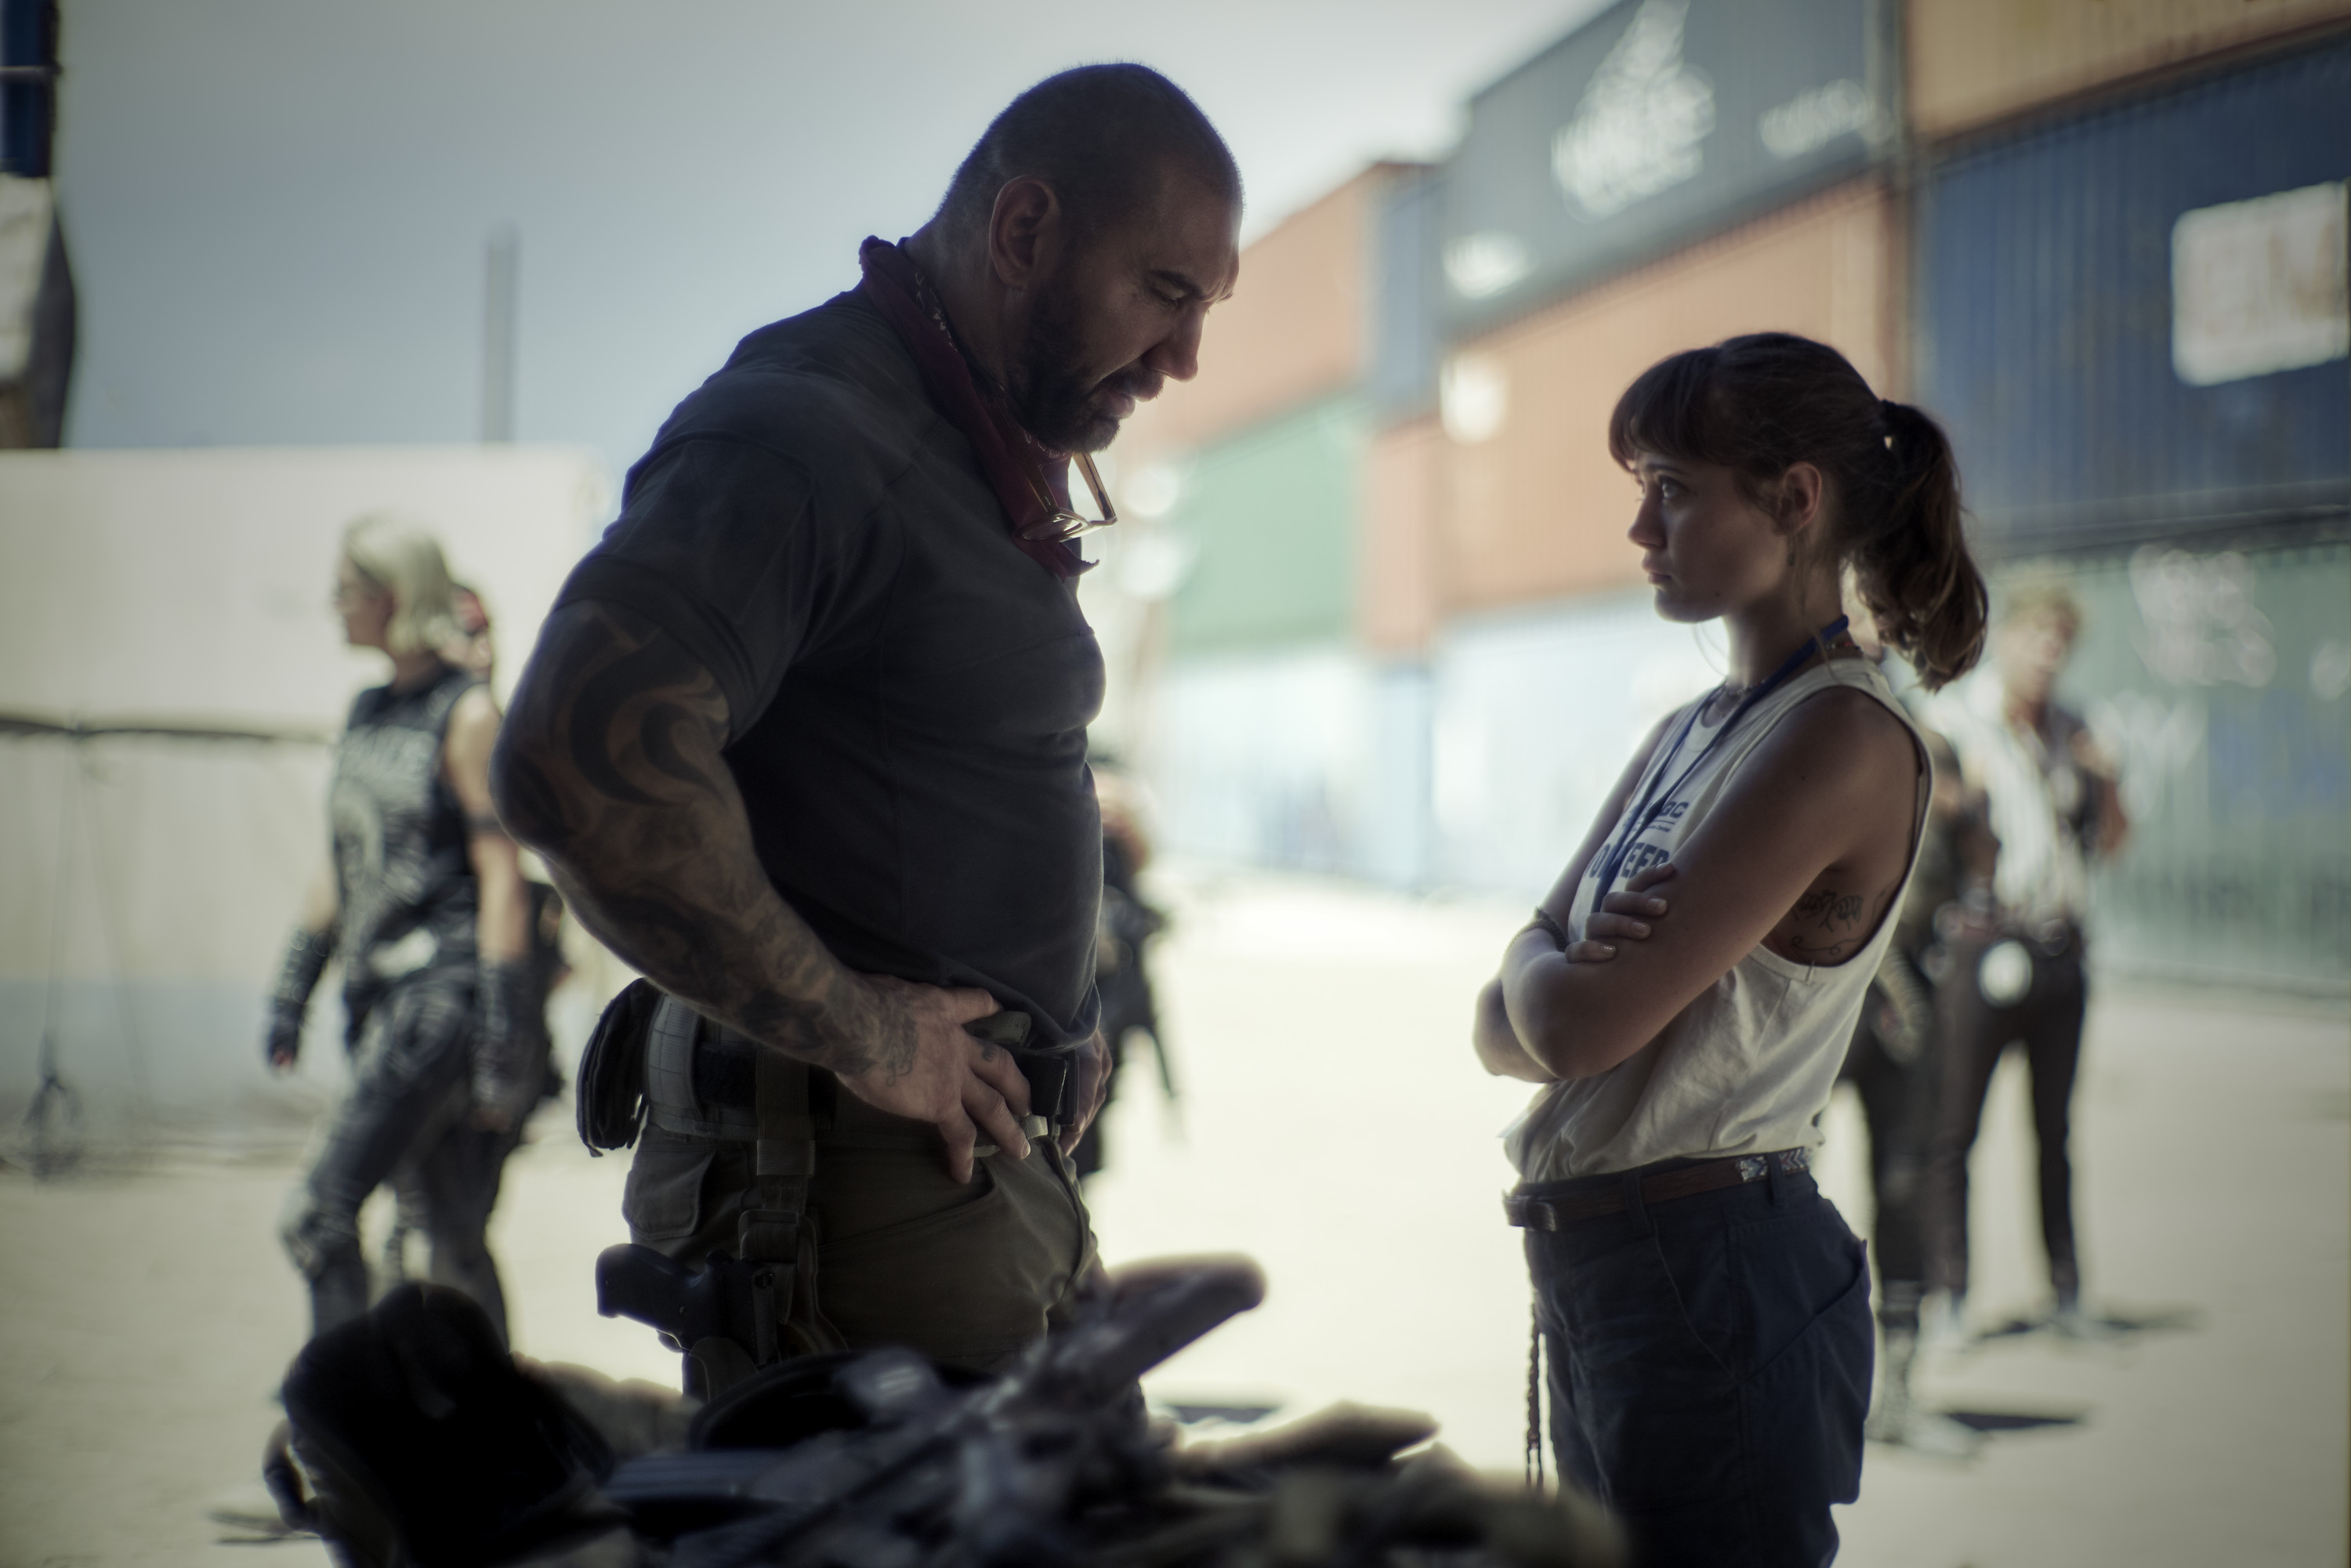 Dave Bautista and Ella Purnell in the father-daughter reconciliation portion of the movie (CLAY ENOS/NETFLIX—© 2021 Netflix, Inc.)